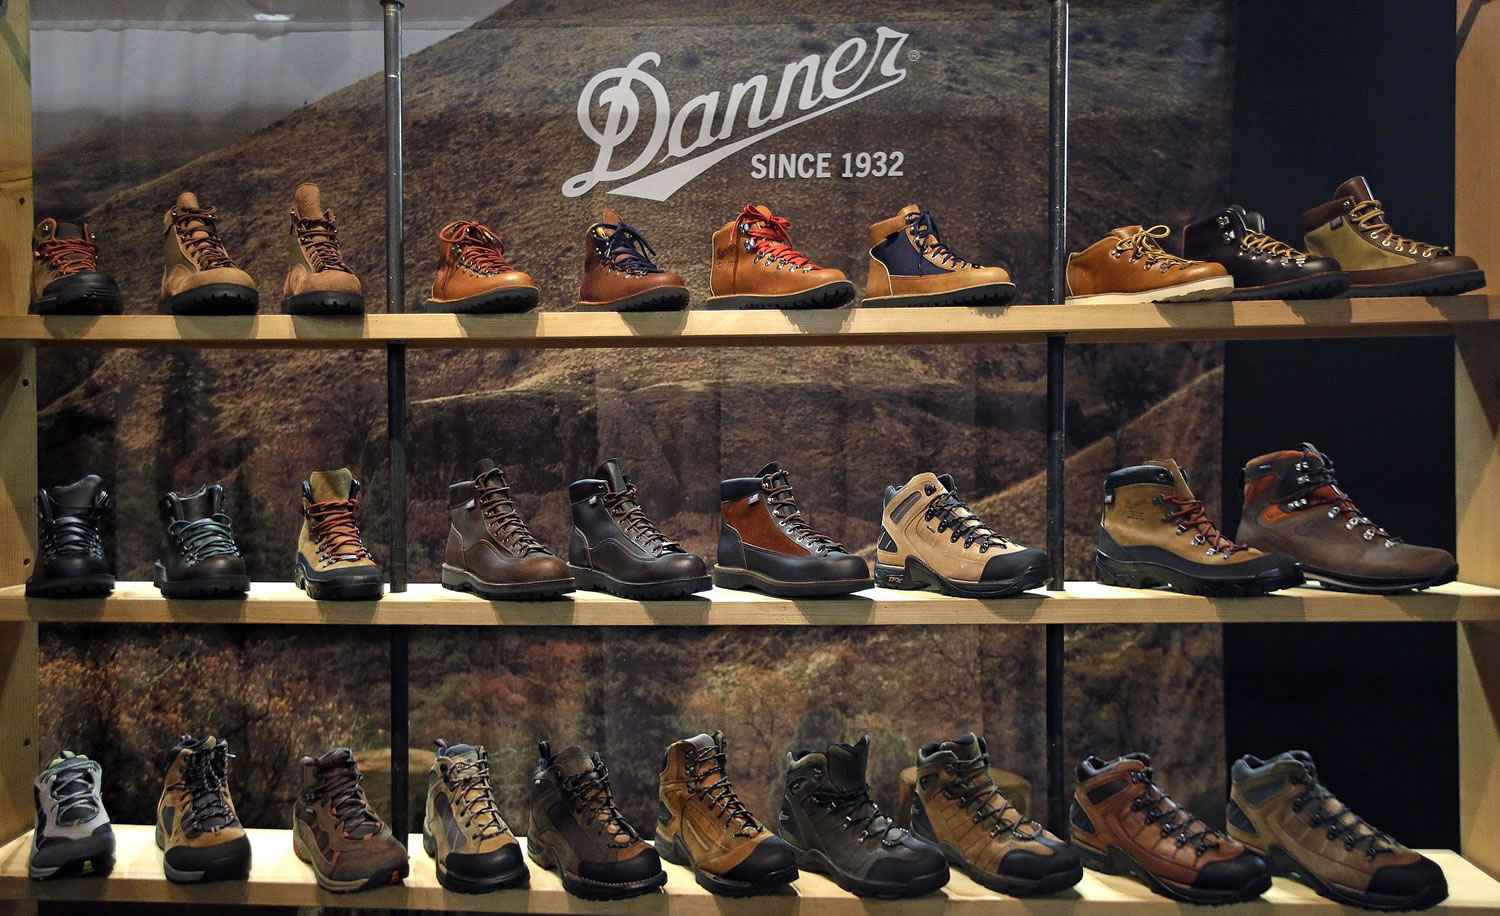 Hiking footwear is displayed at the Danner Boots booth at the Outdoor Retailer Show in Salt Lake City.